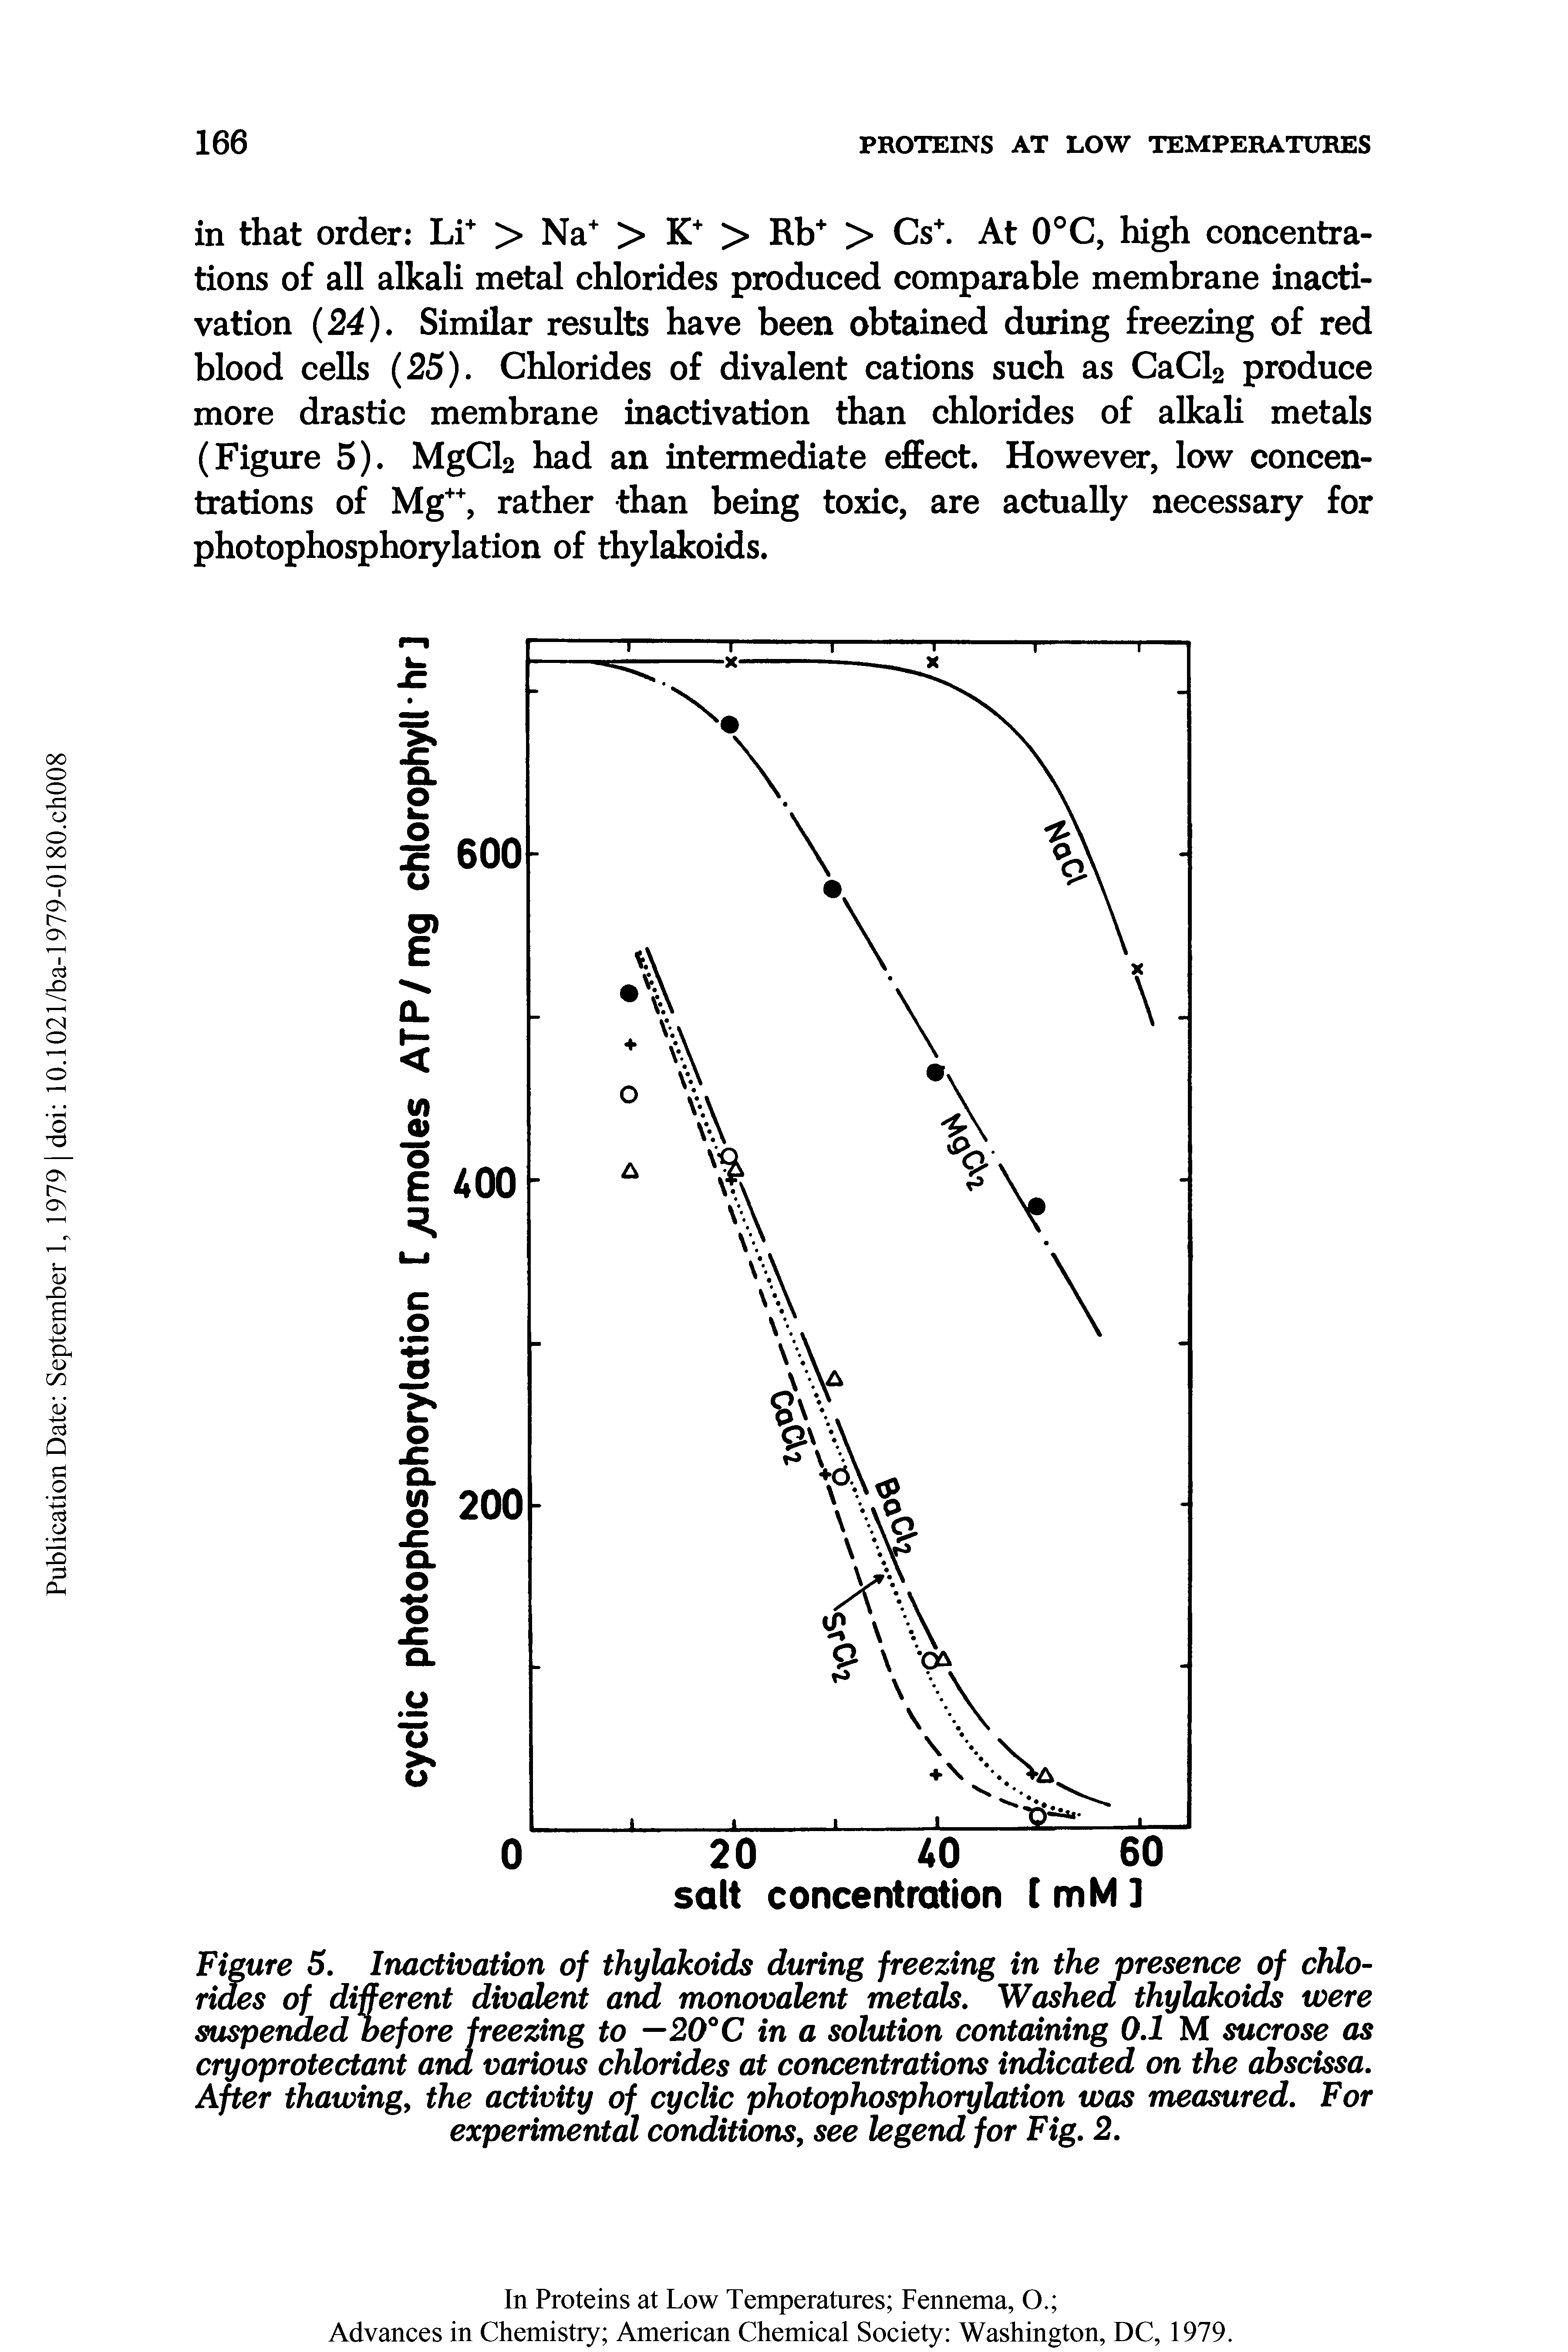 Figure 5. Inactivation of thylakoids during freezing in the presence of chlorides of different divalent and monovalent metals. Washed thylakoids were suspended before freezing to —20°C in a solution containing 0.1 M sucrose as cryoprotectant ana various chlorides at concentrations indicated on the abscissa. After thawing, the activity of cyclic photophosphorylation was measured. For experimental conditions, see legend for Fig. 2.